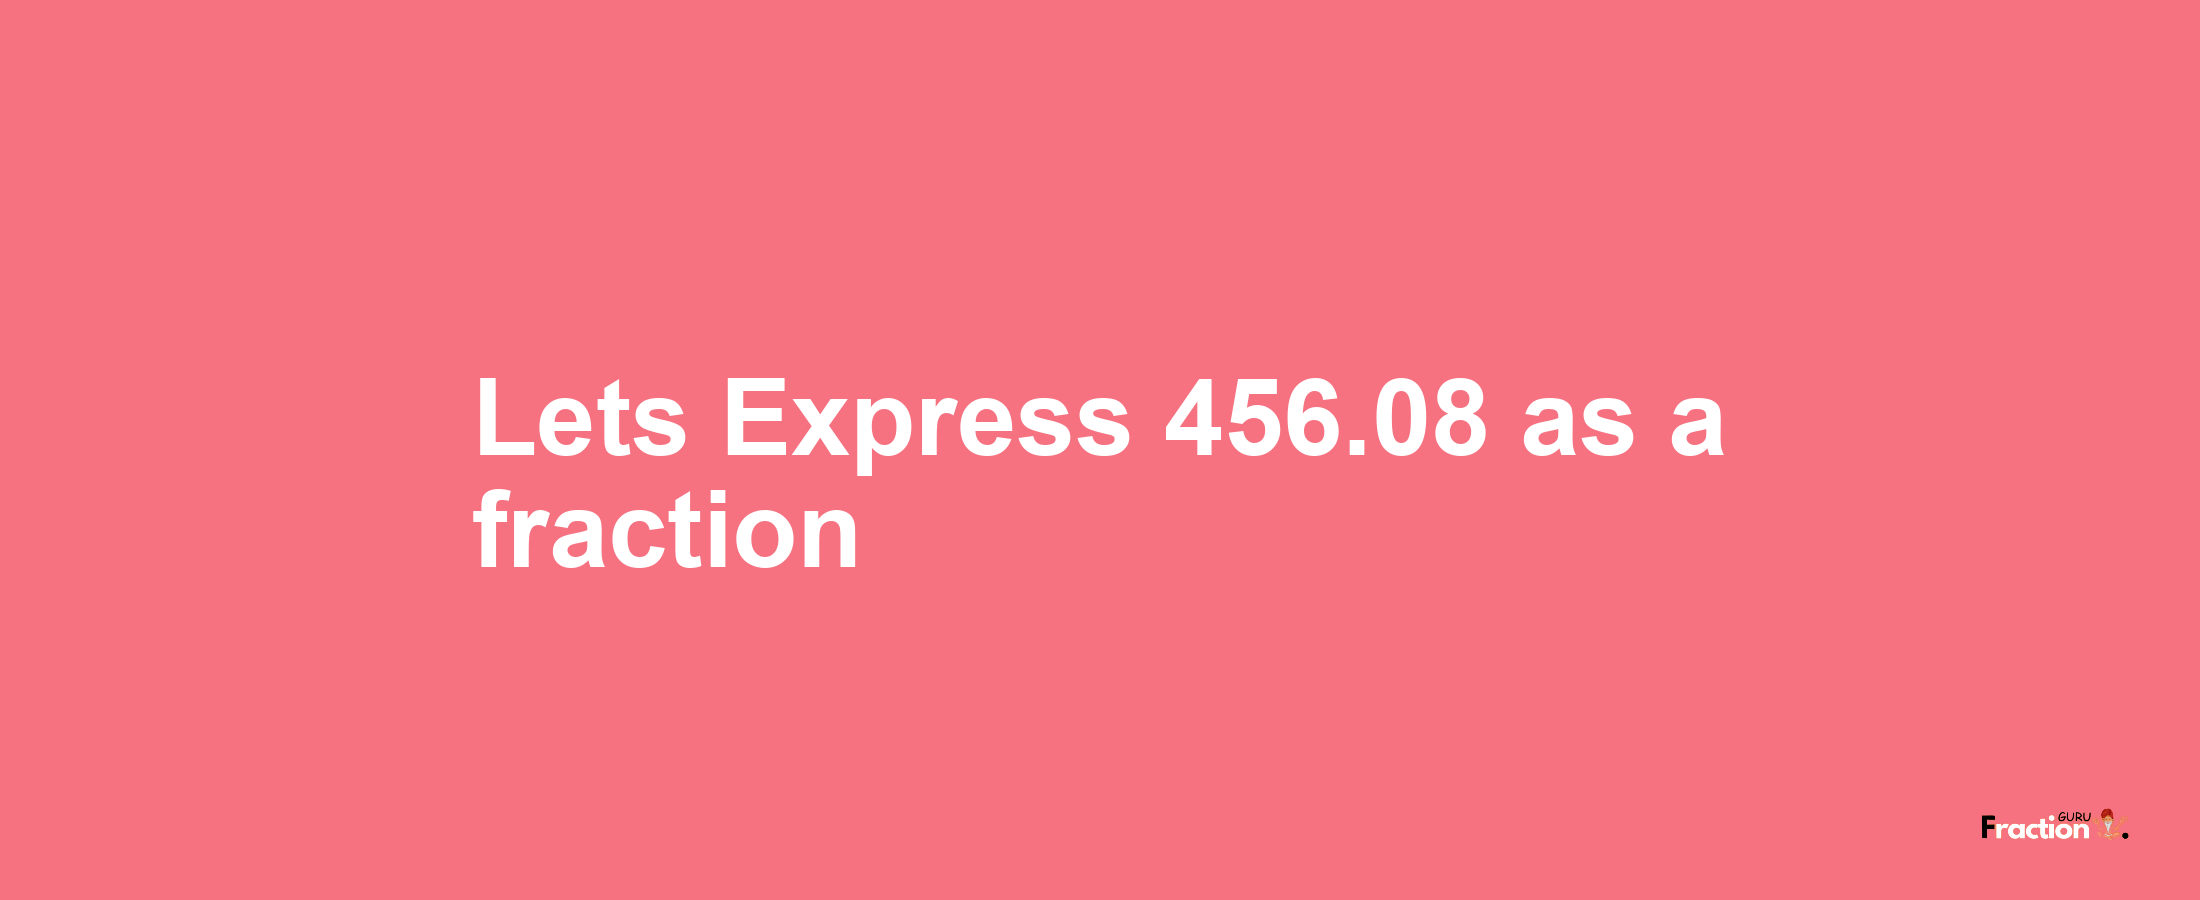 Lets Express 456.08 as afraction